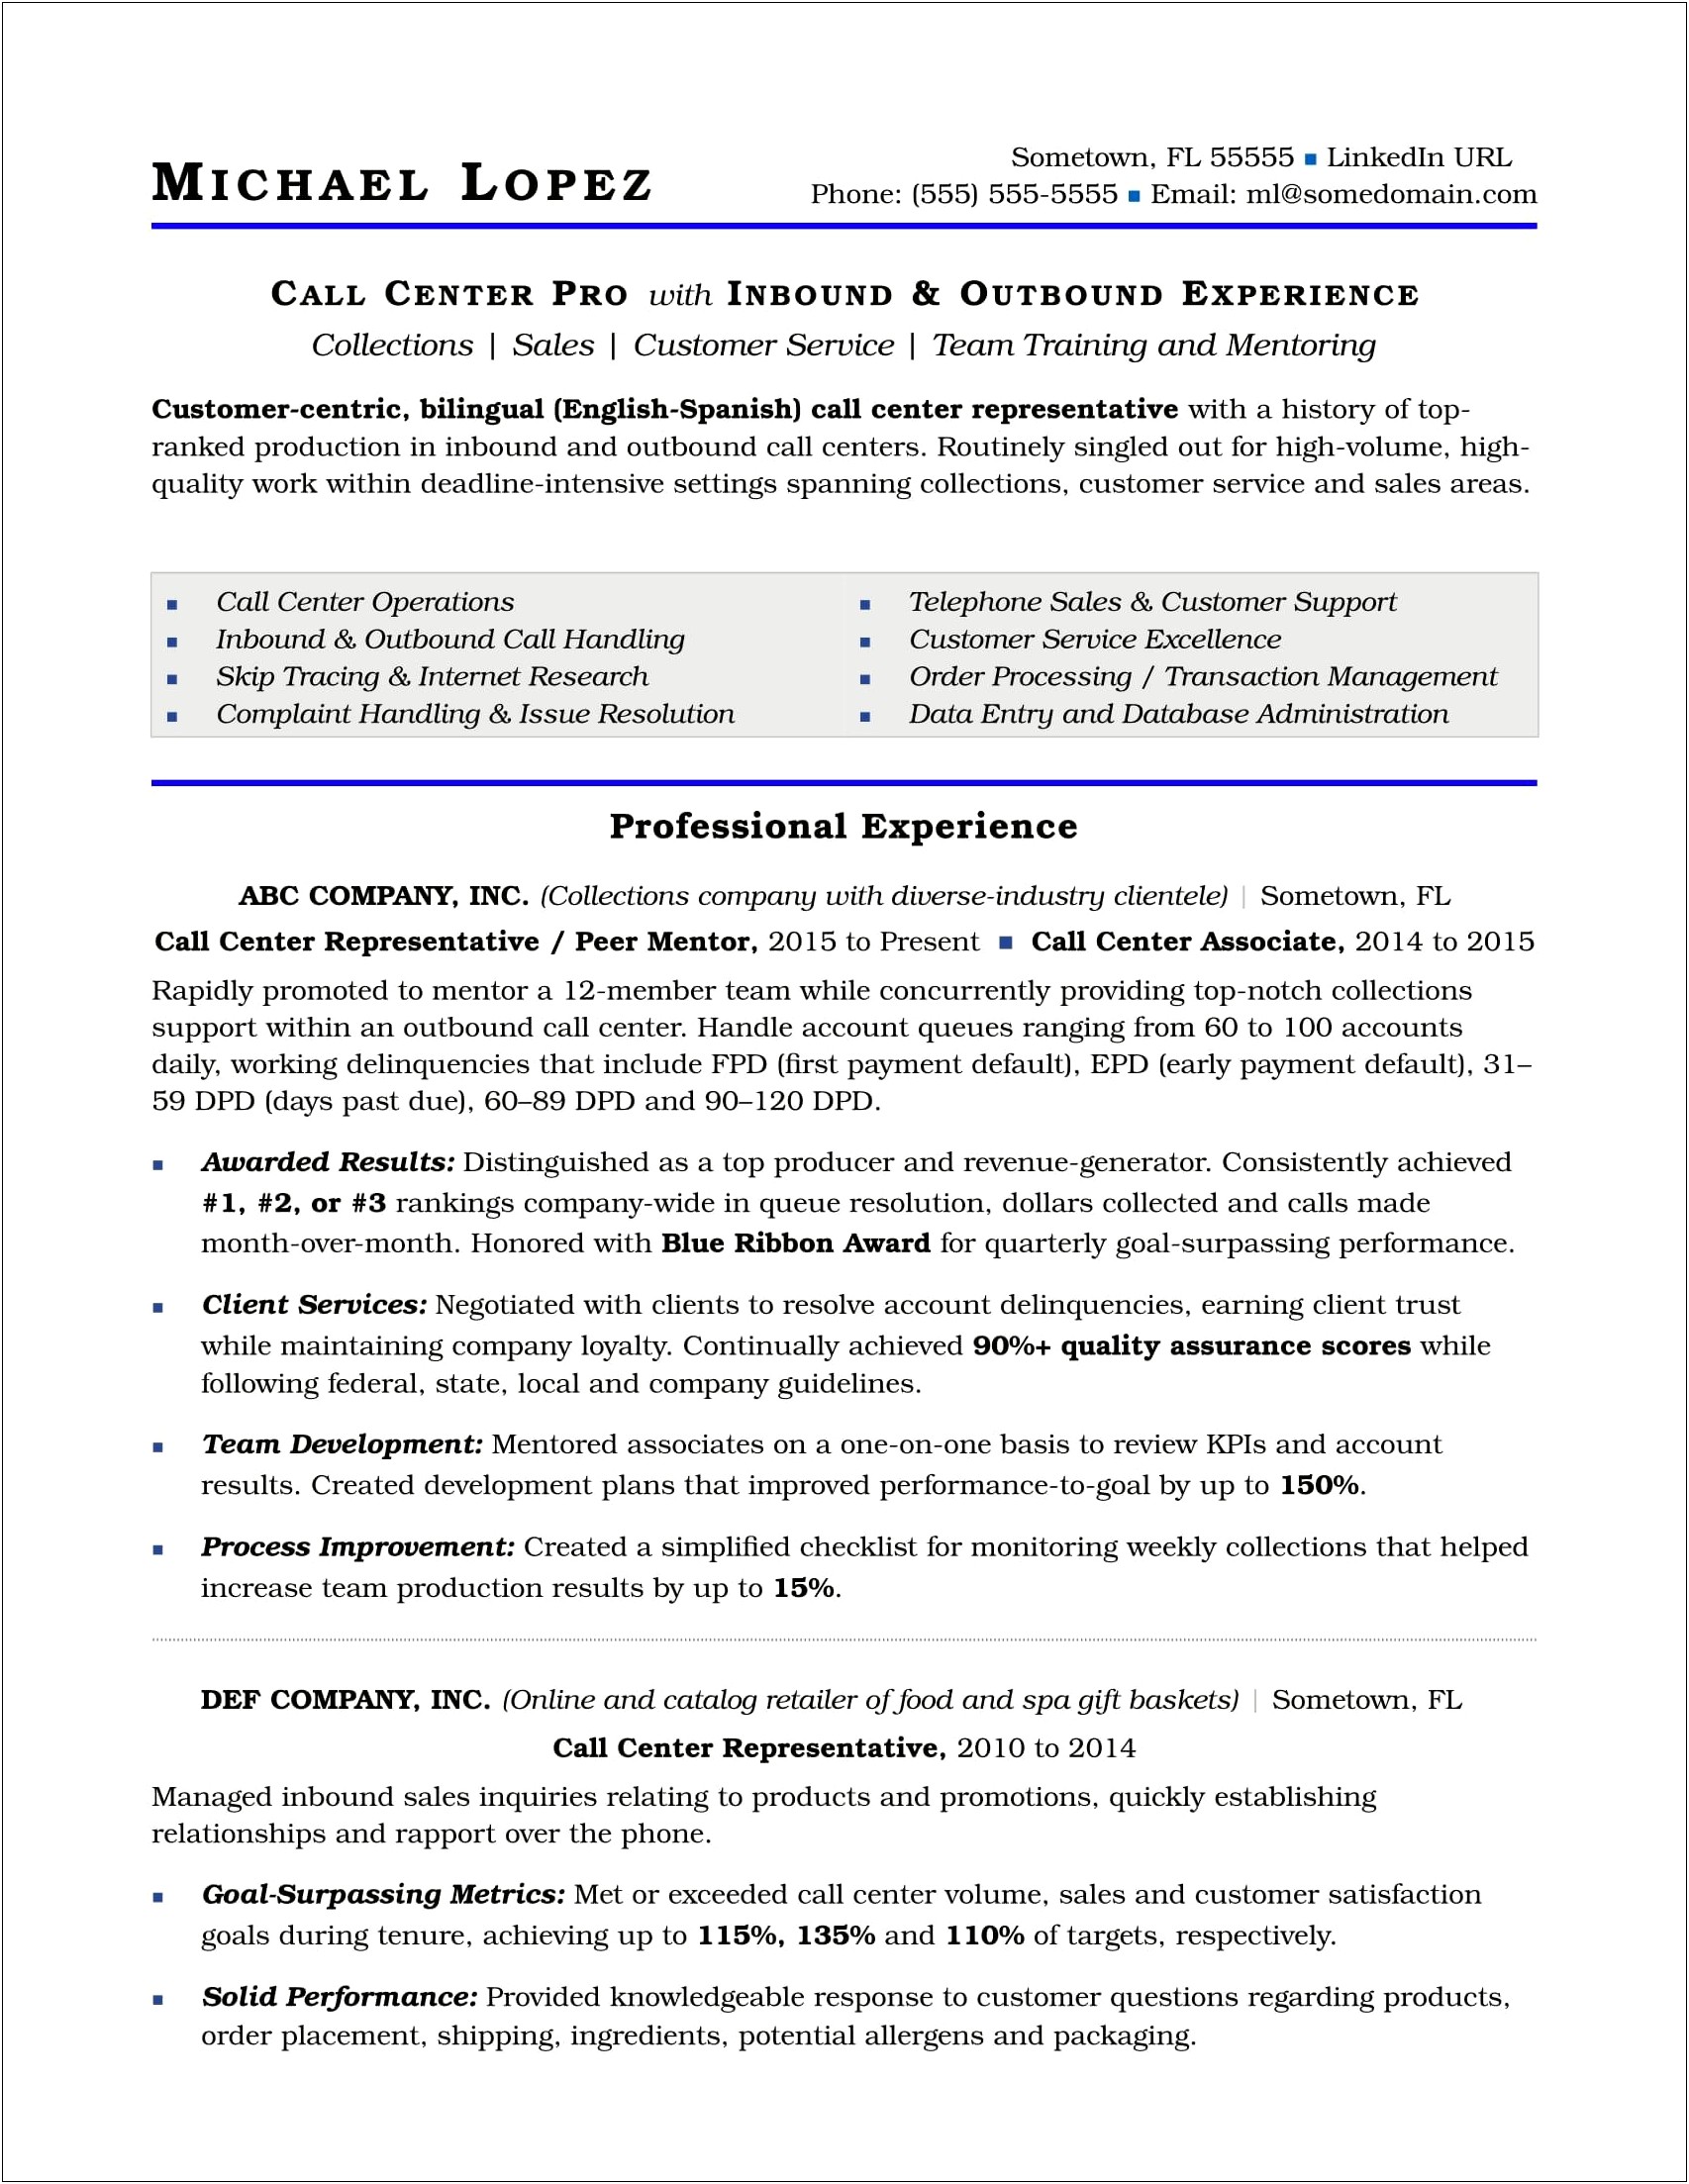 One Job Experience Resume Examples